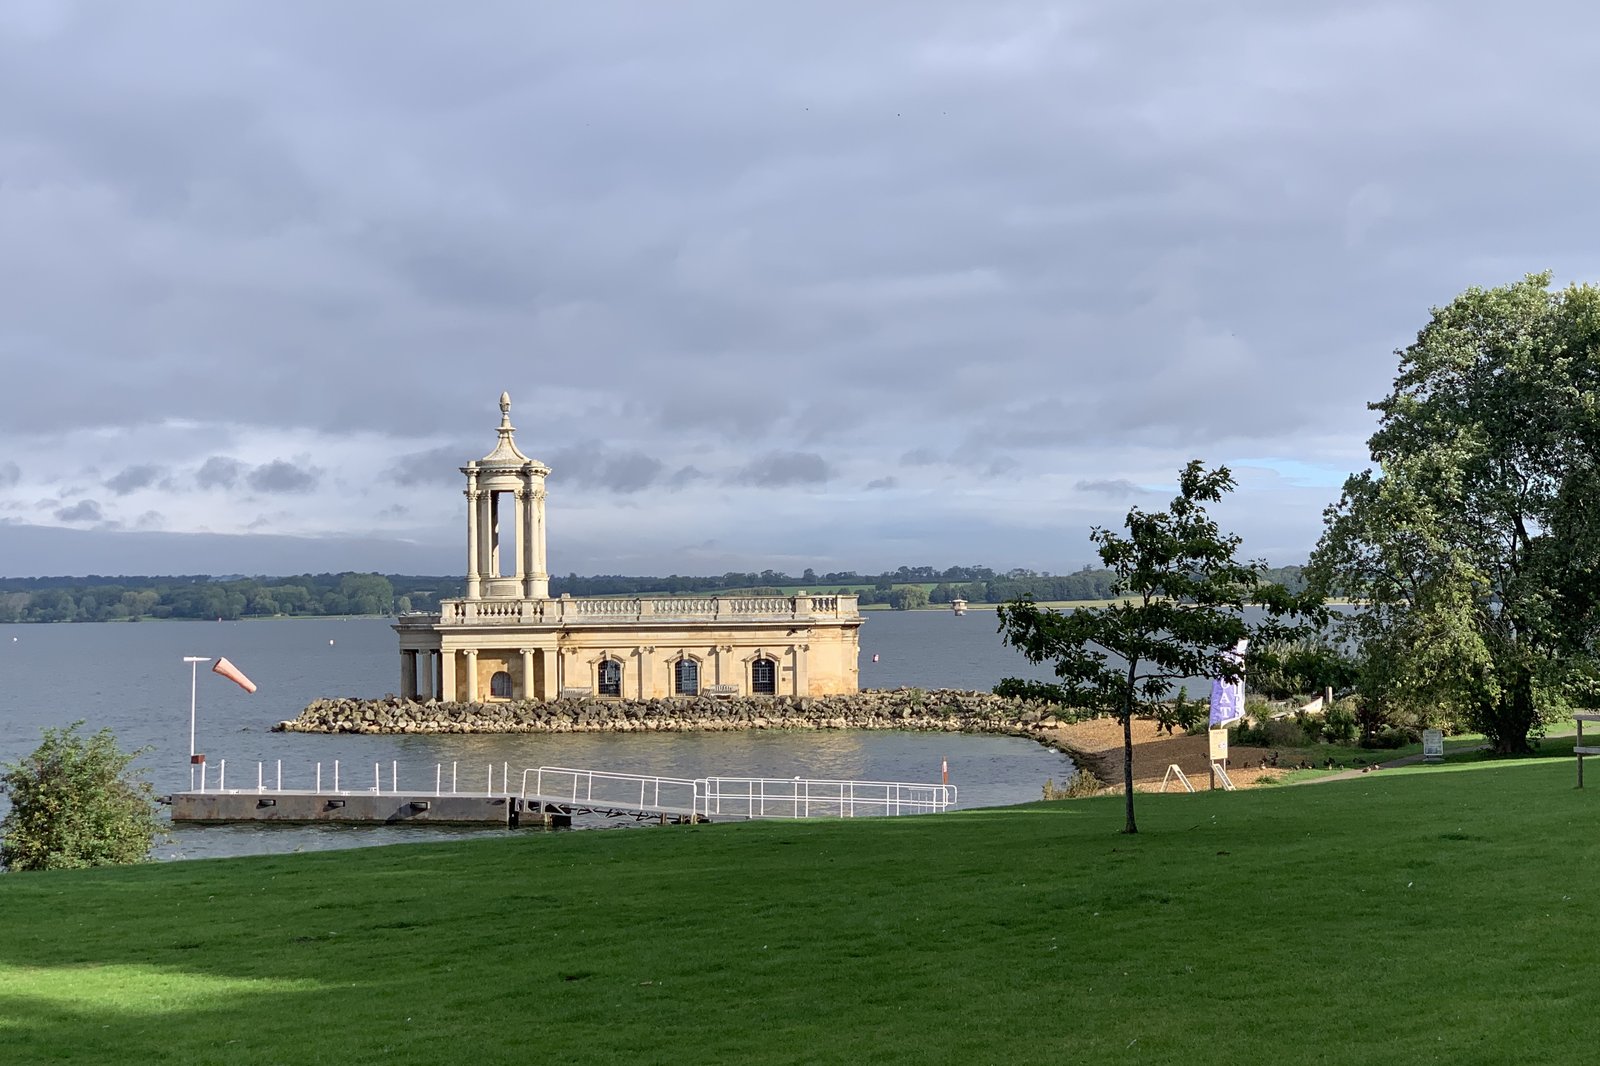 Rutland Water is one of the most beautiful and tranquil places in the United Kingdom